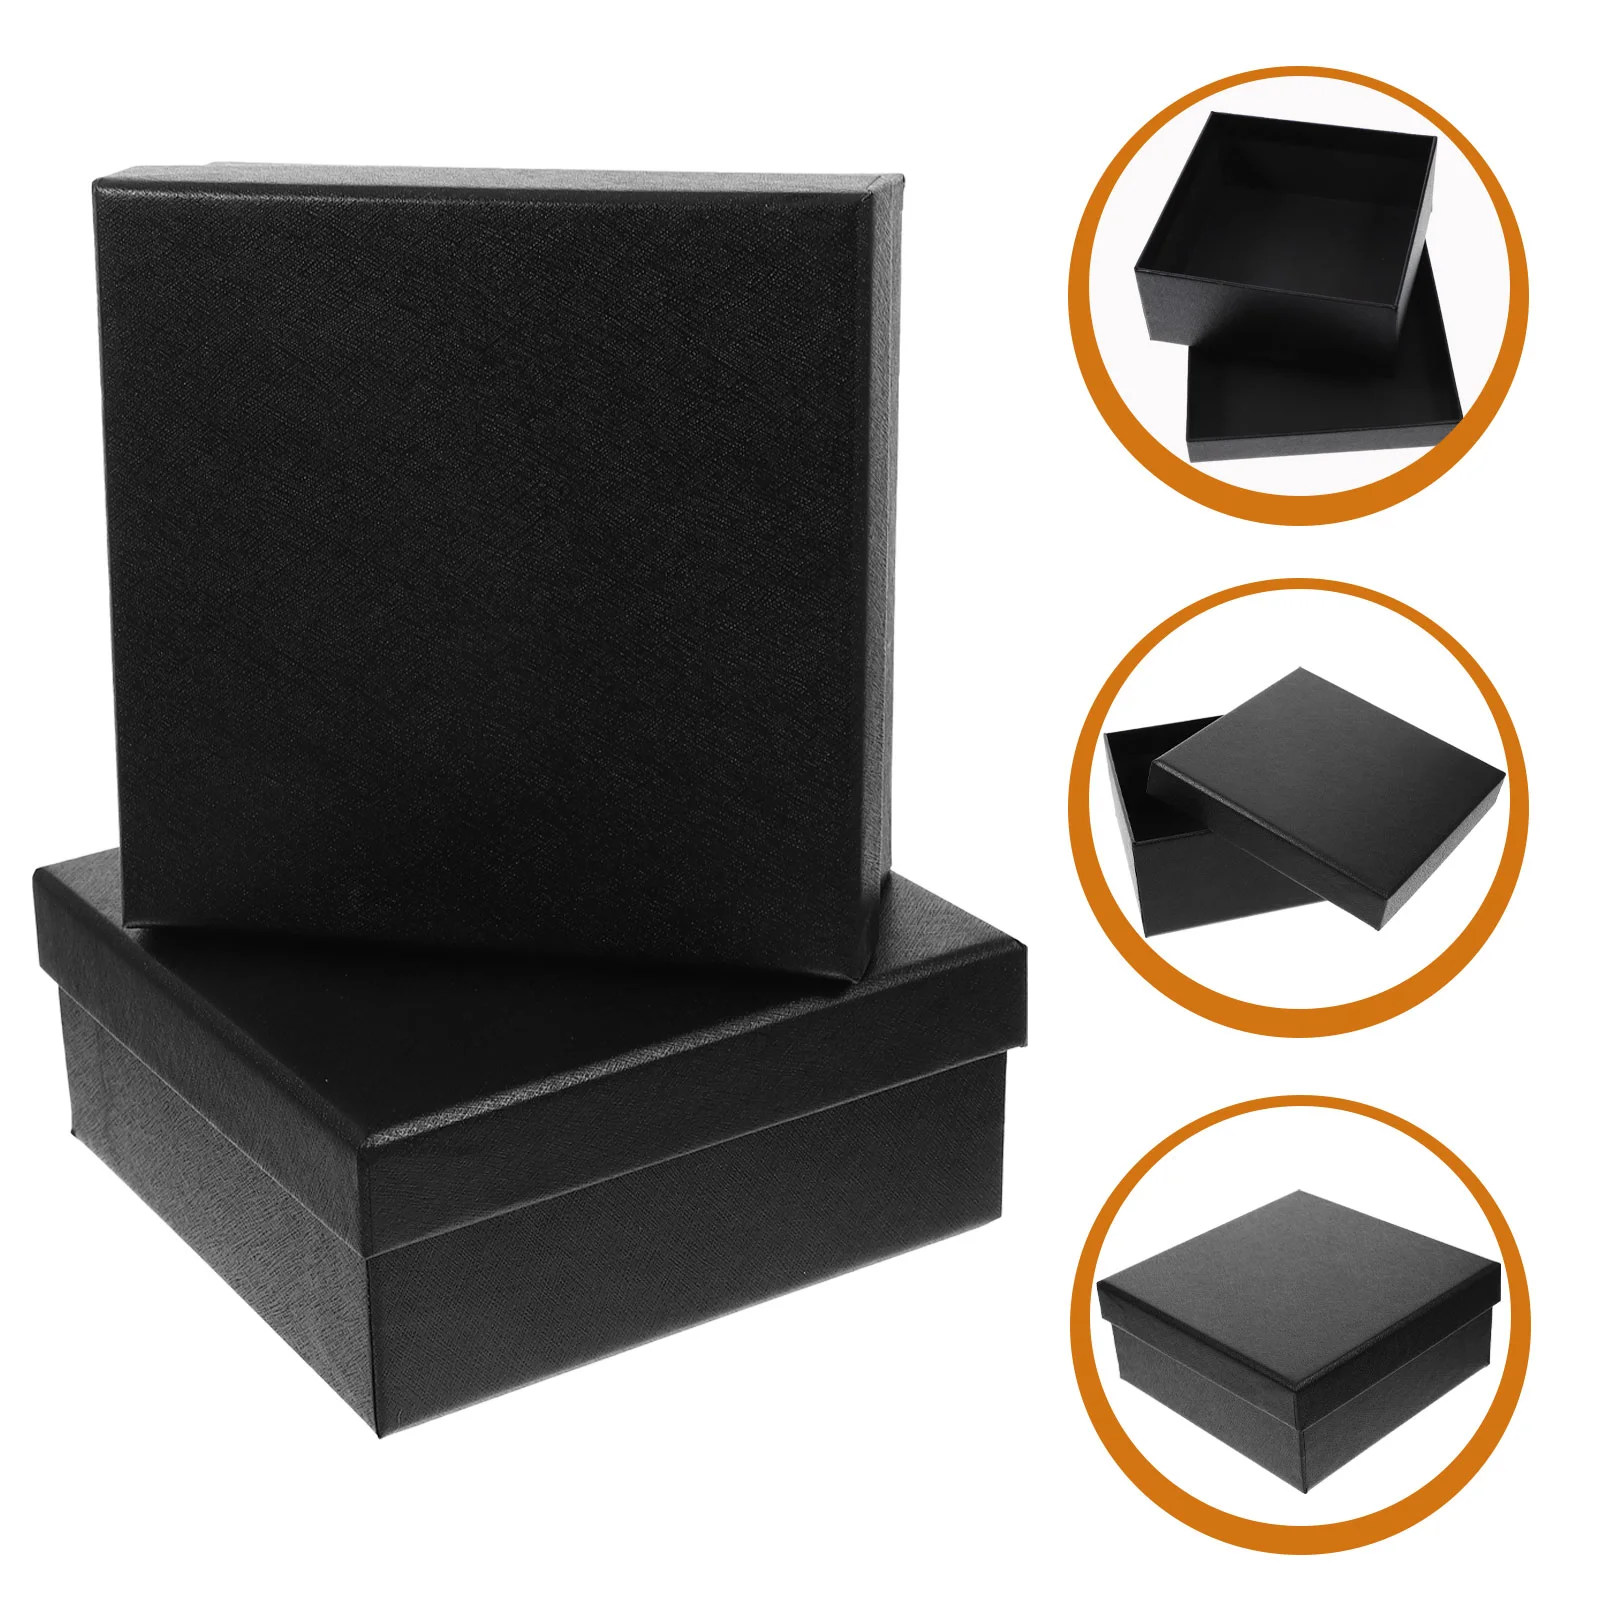 

10pcs Present Storage Containers Gift Wrapping Box Gift Storage Boxes Party Gift Boxes Containing wedding favors Bag